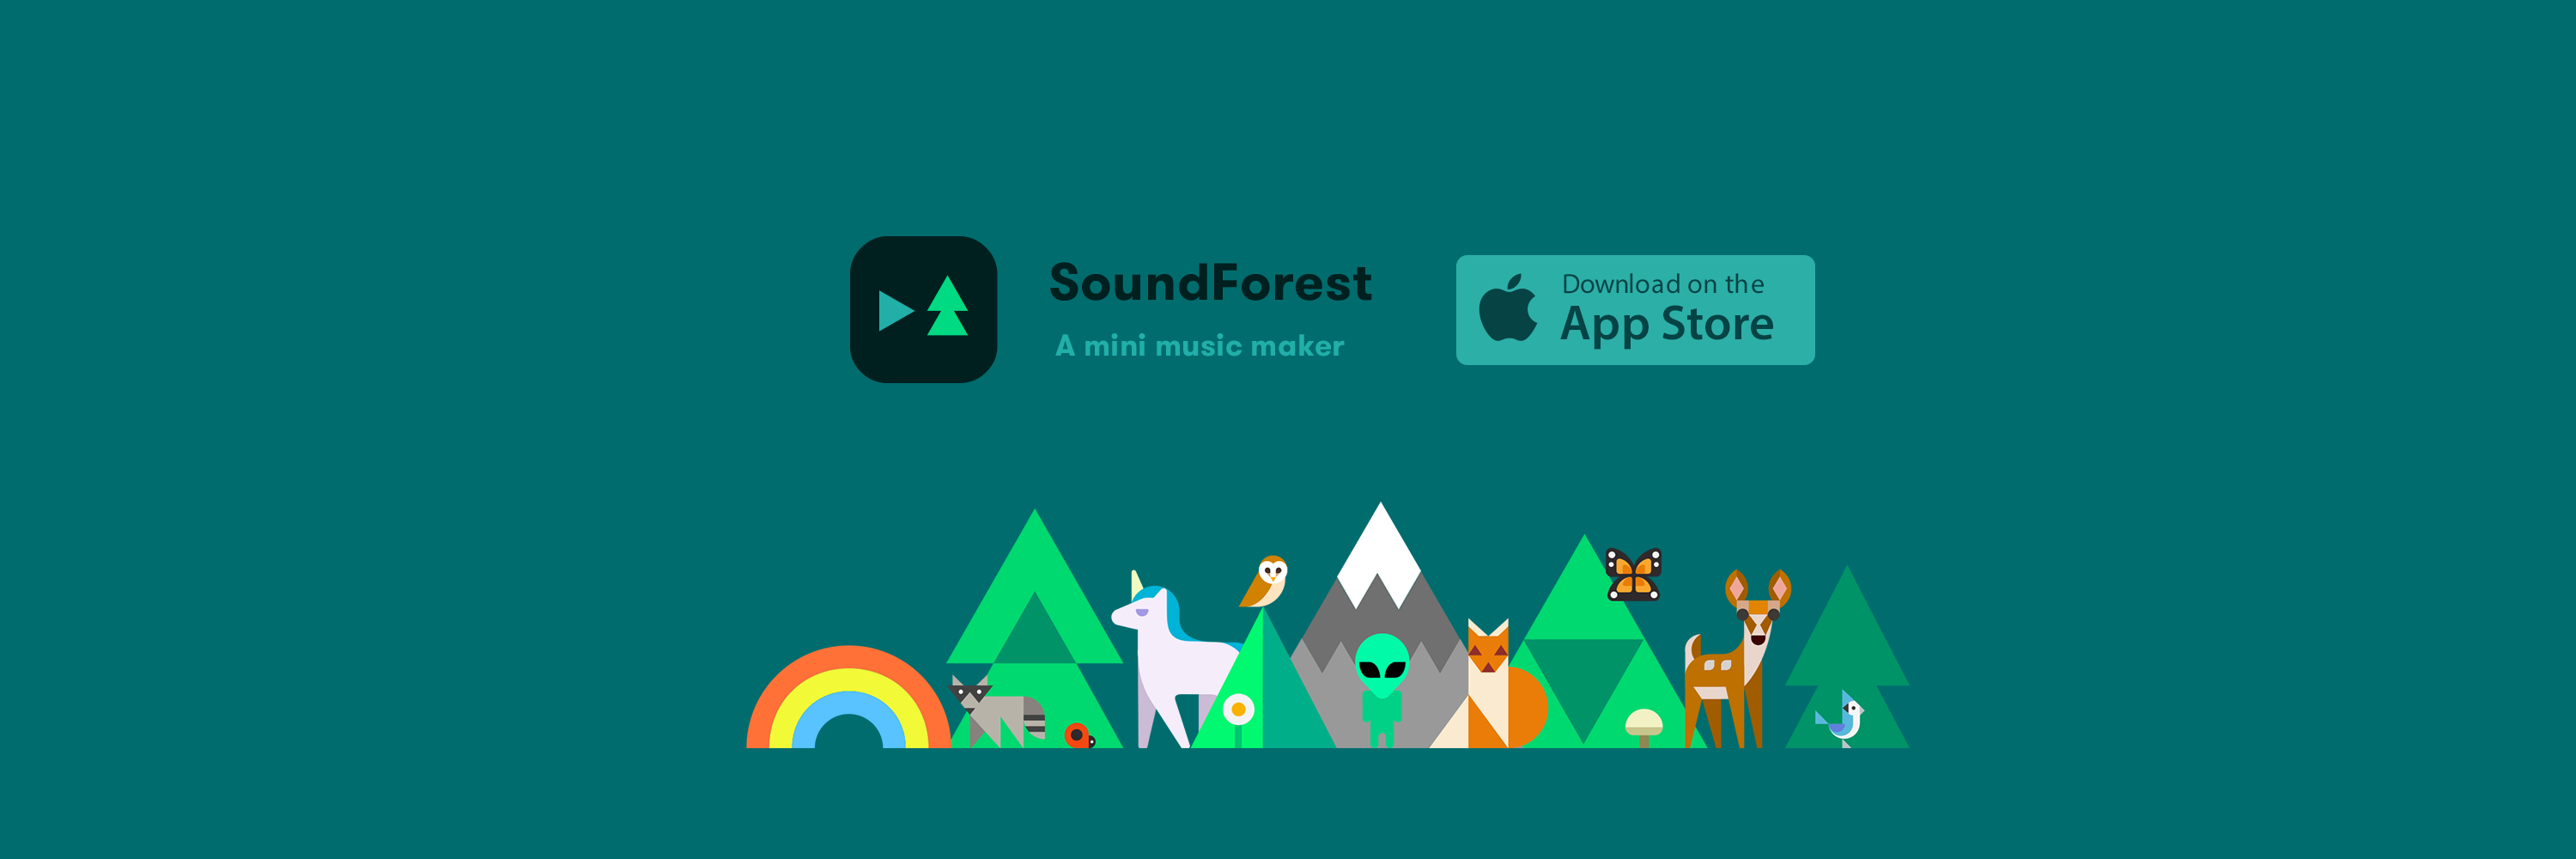 Polyword, SoundForest, Little Ben, and other apps to check out